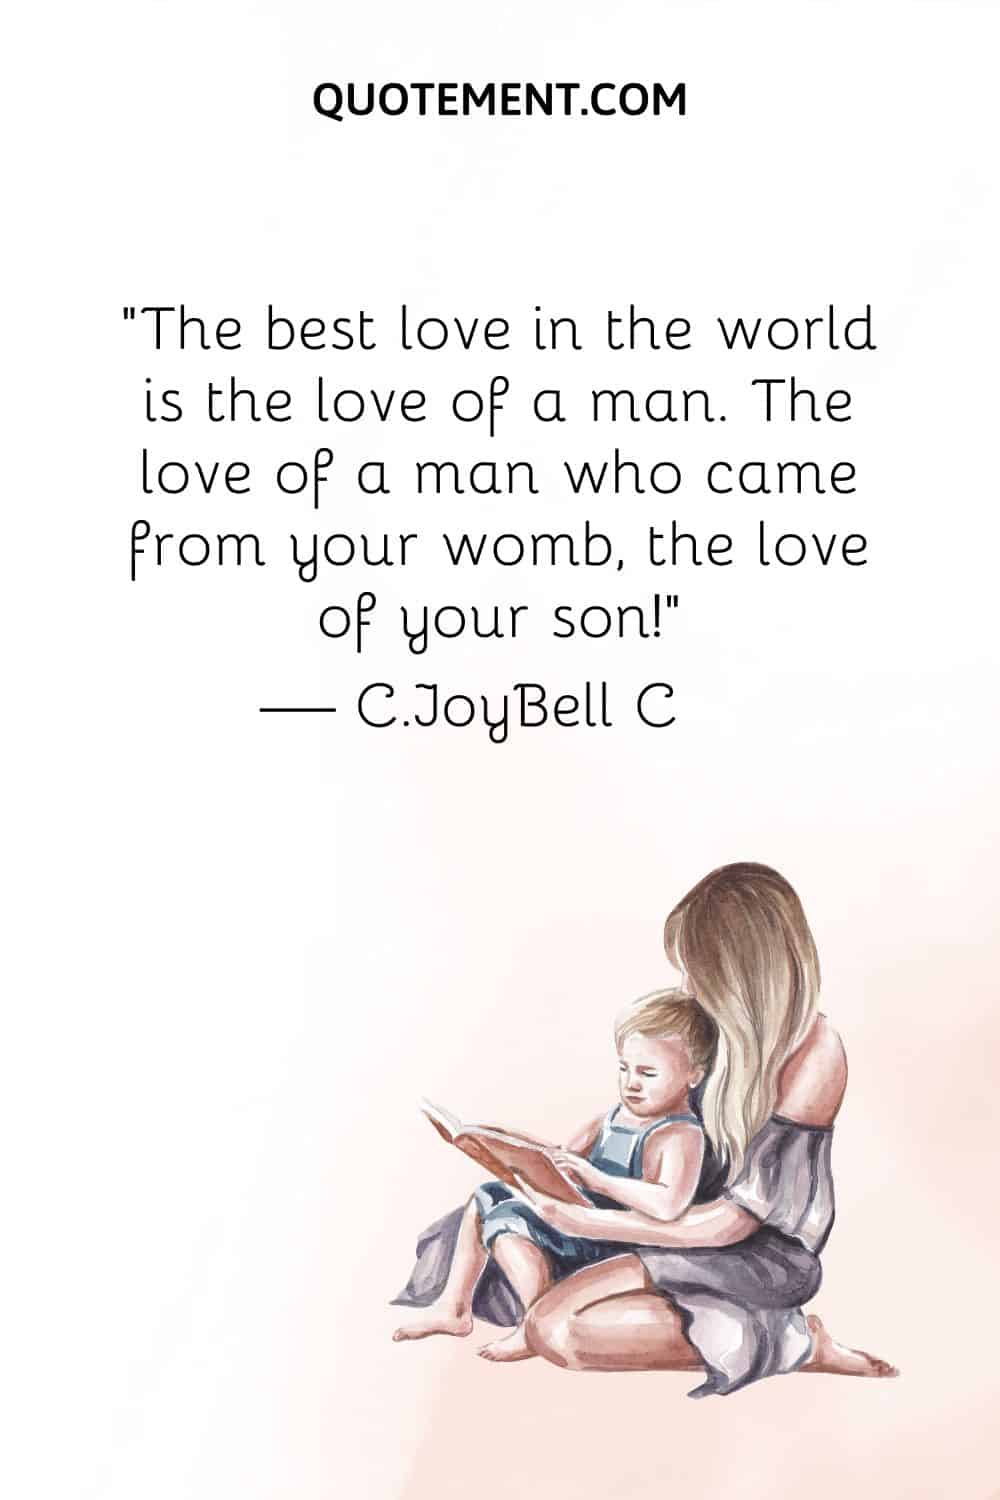 image od mother and son reading a book representing the best son quote